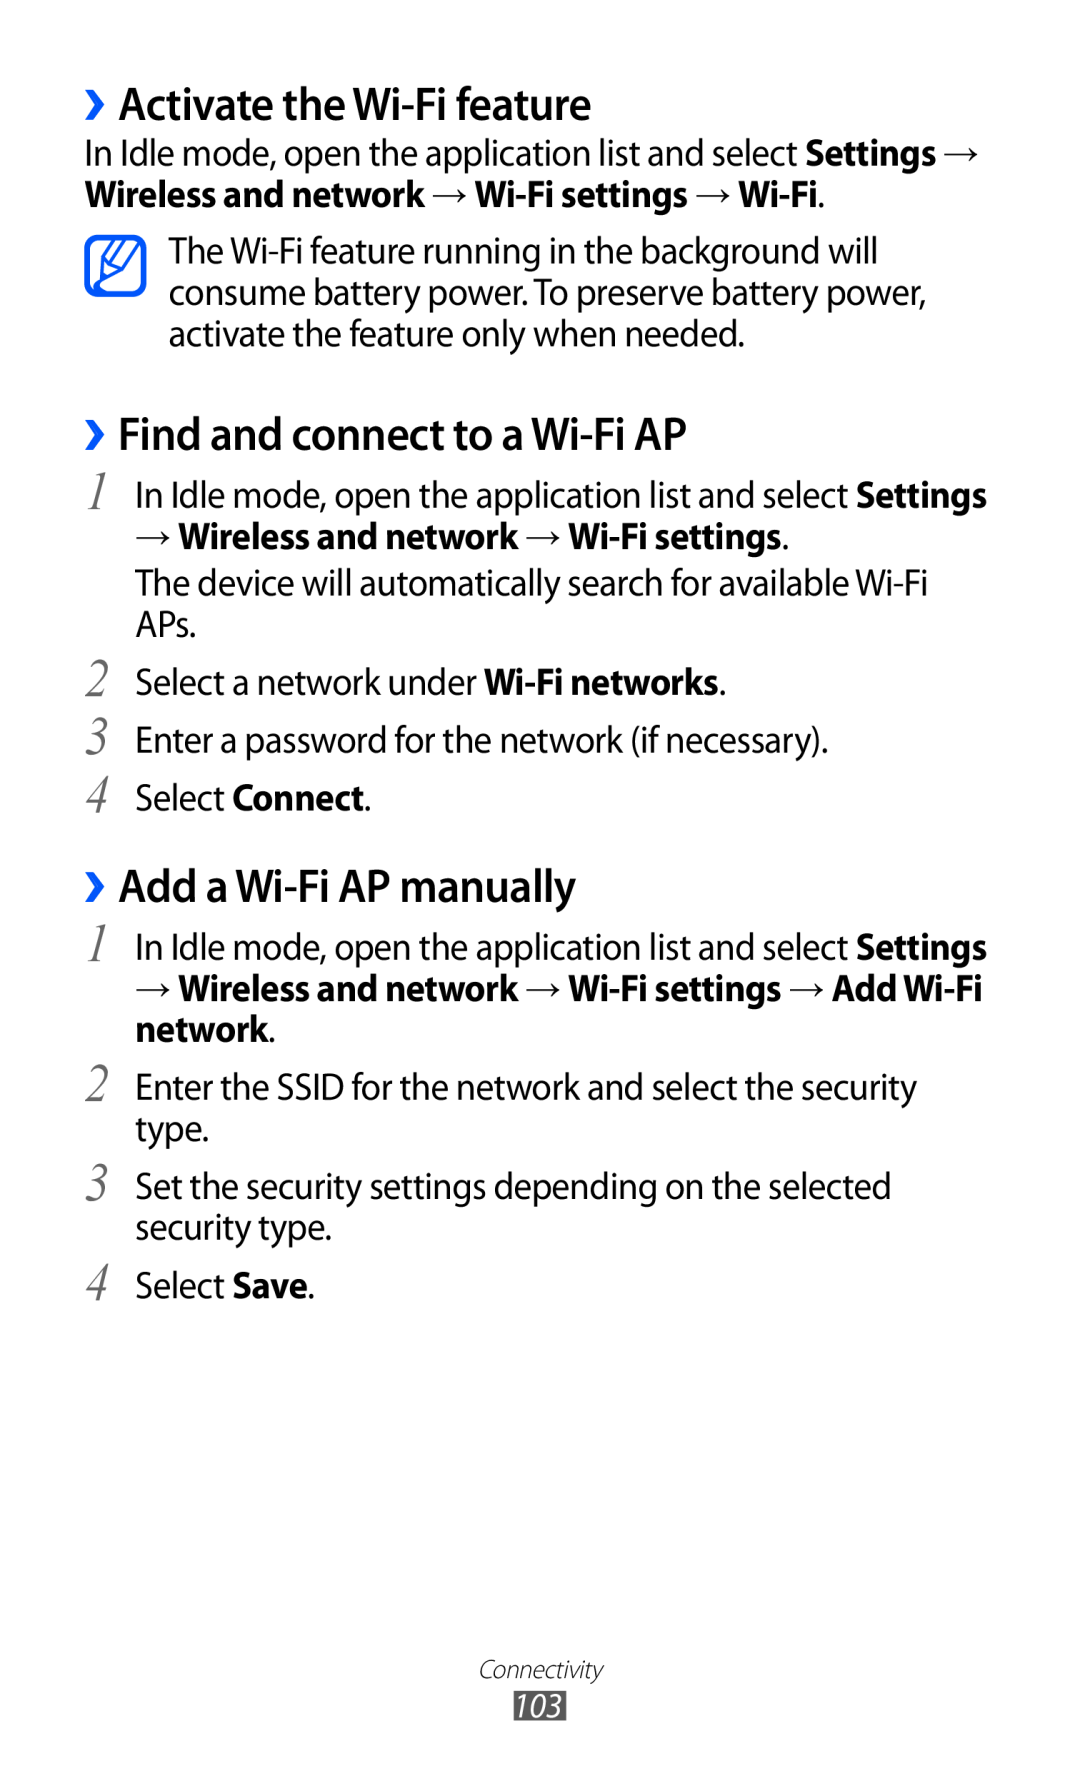 Samsung GT-I9070 user manual ››Activate the Wi-Fi feature, ››Find and connect to a Wi-Fi AP, ››Add a Wi-Fi AP manually 